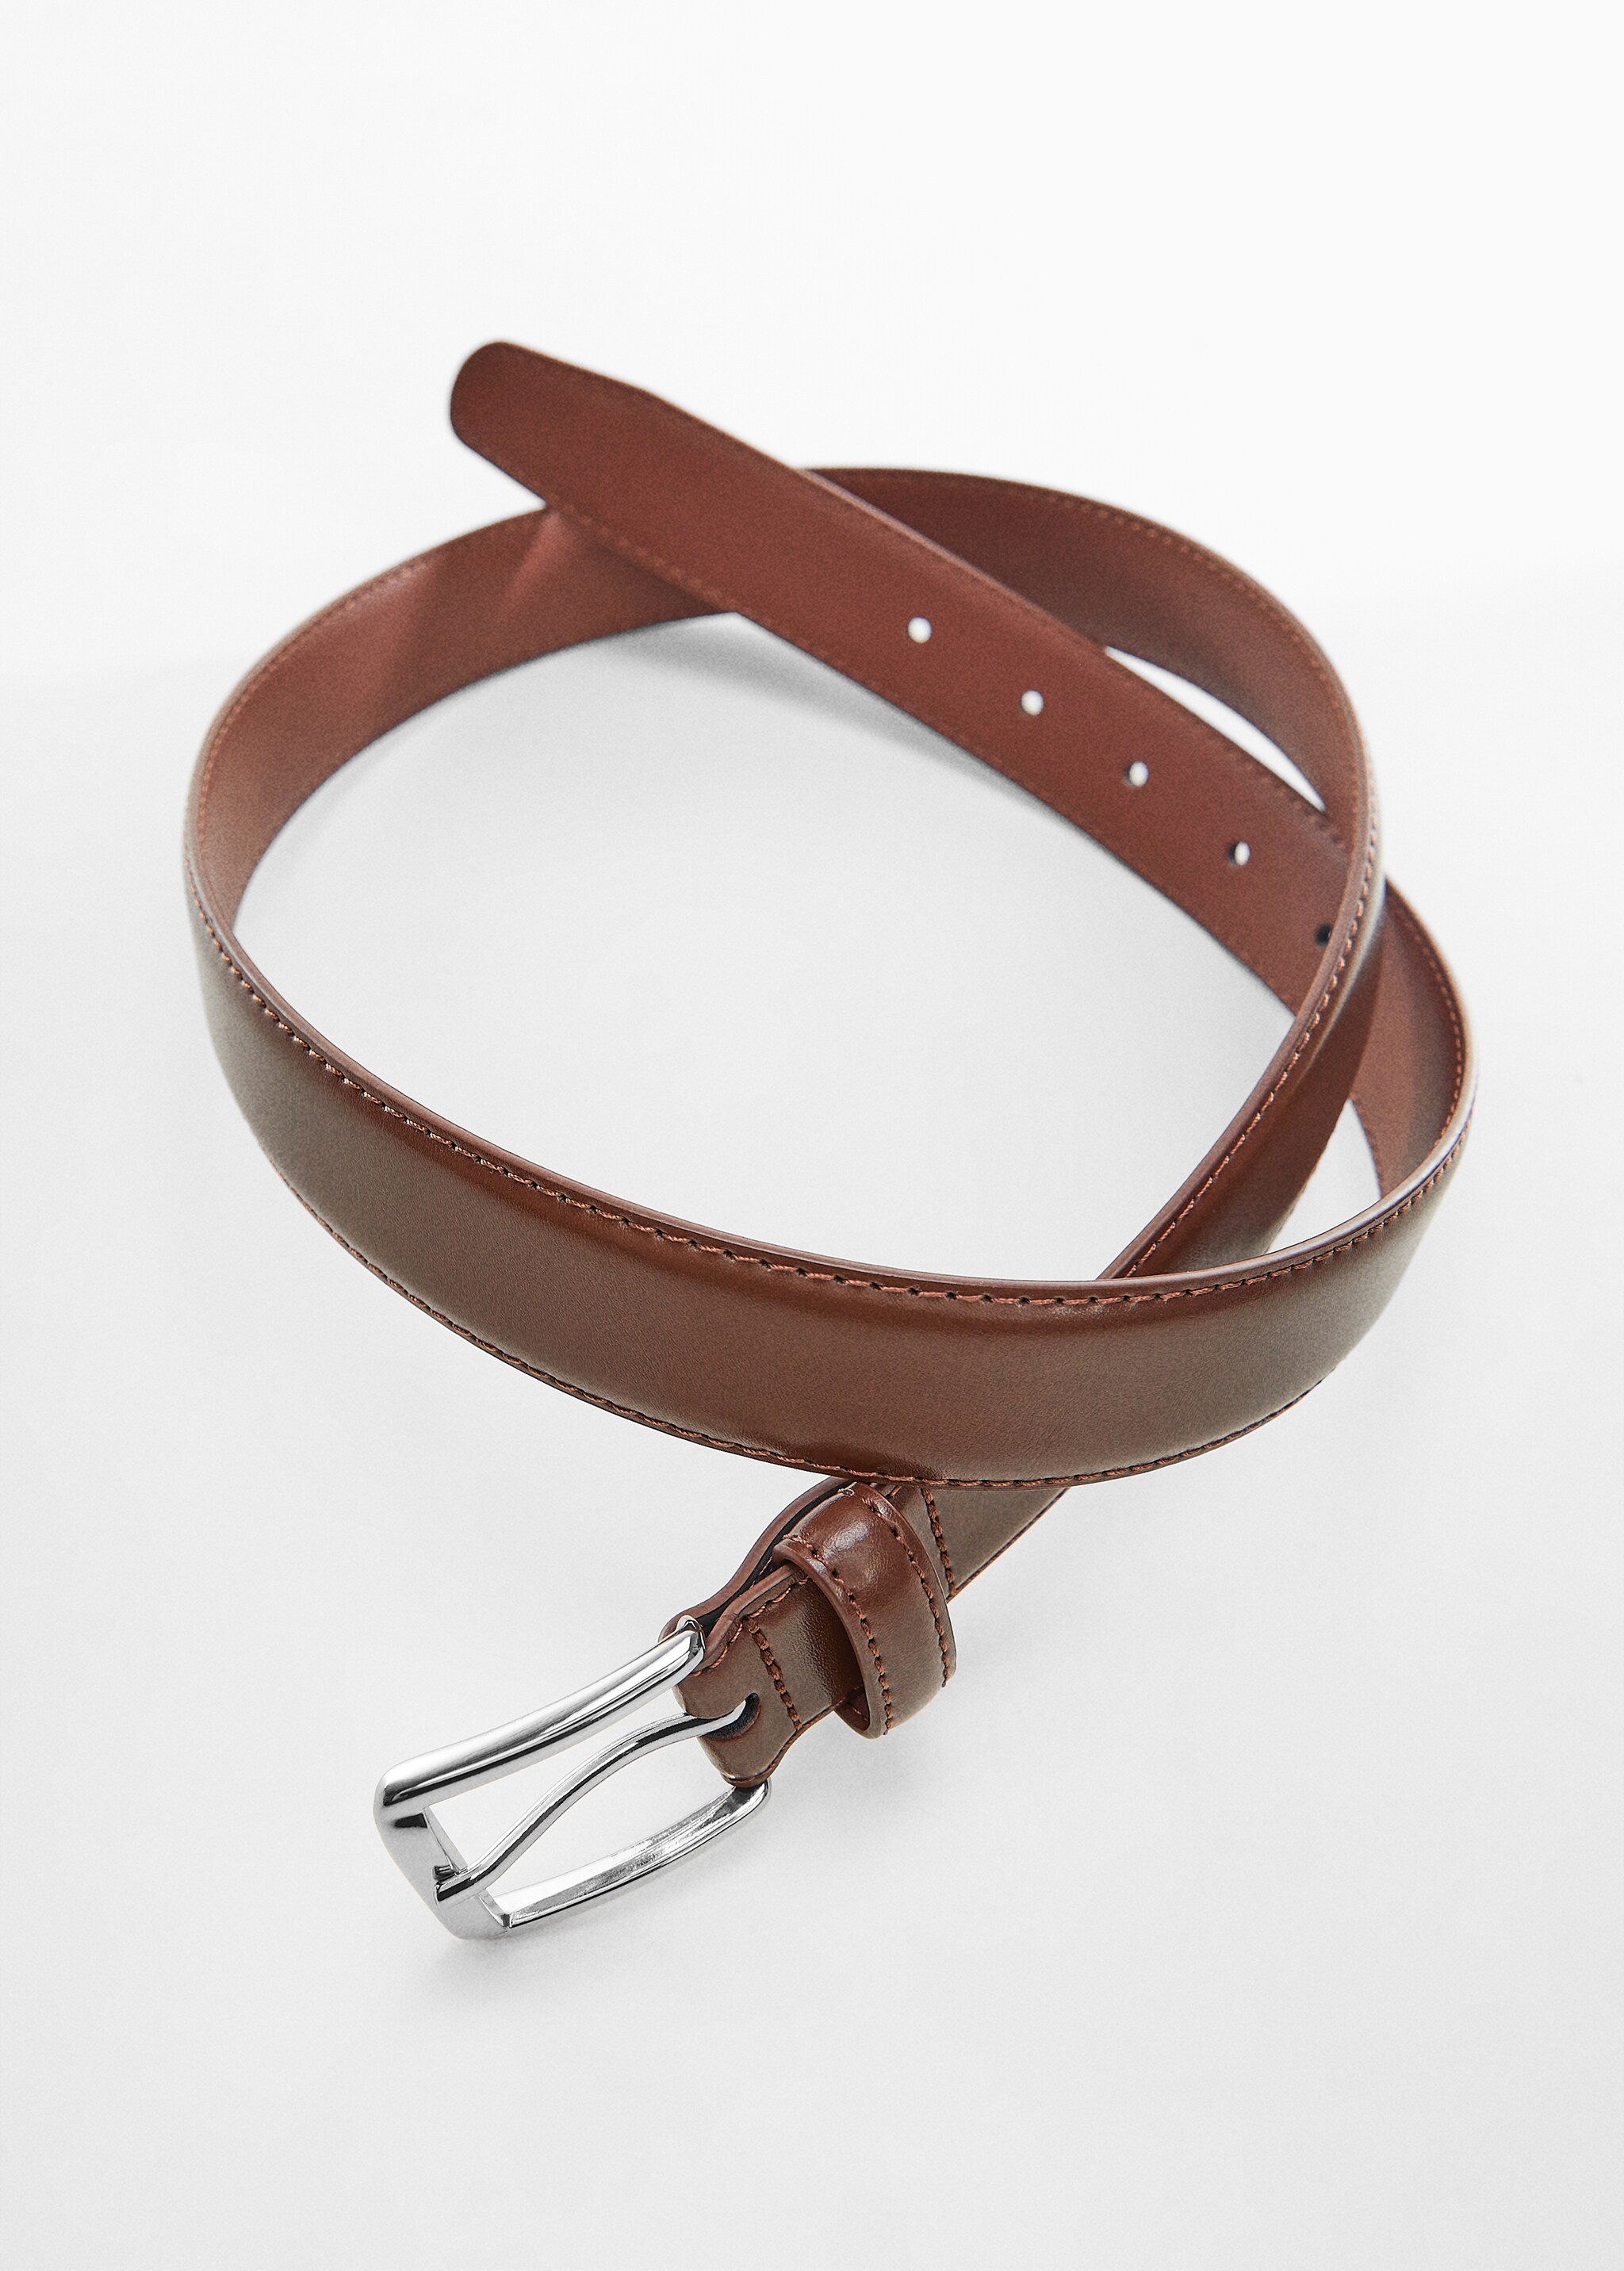 Leather belt - Details of the article 2